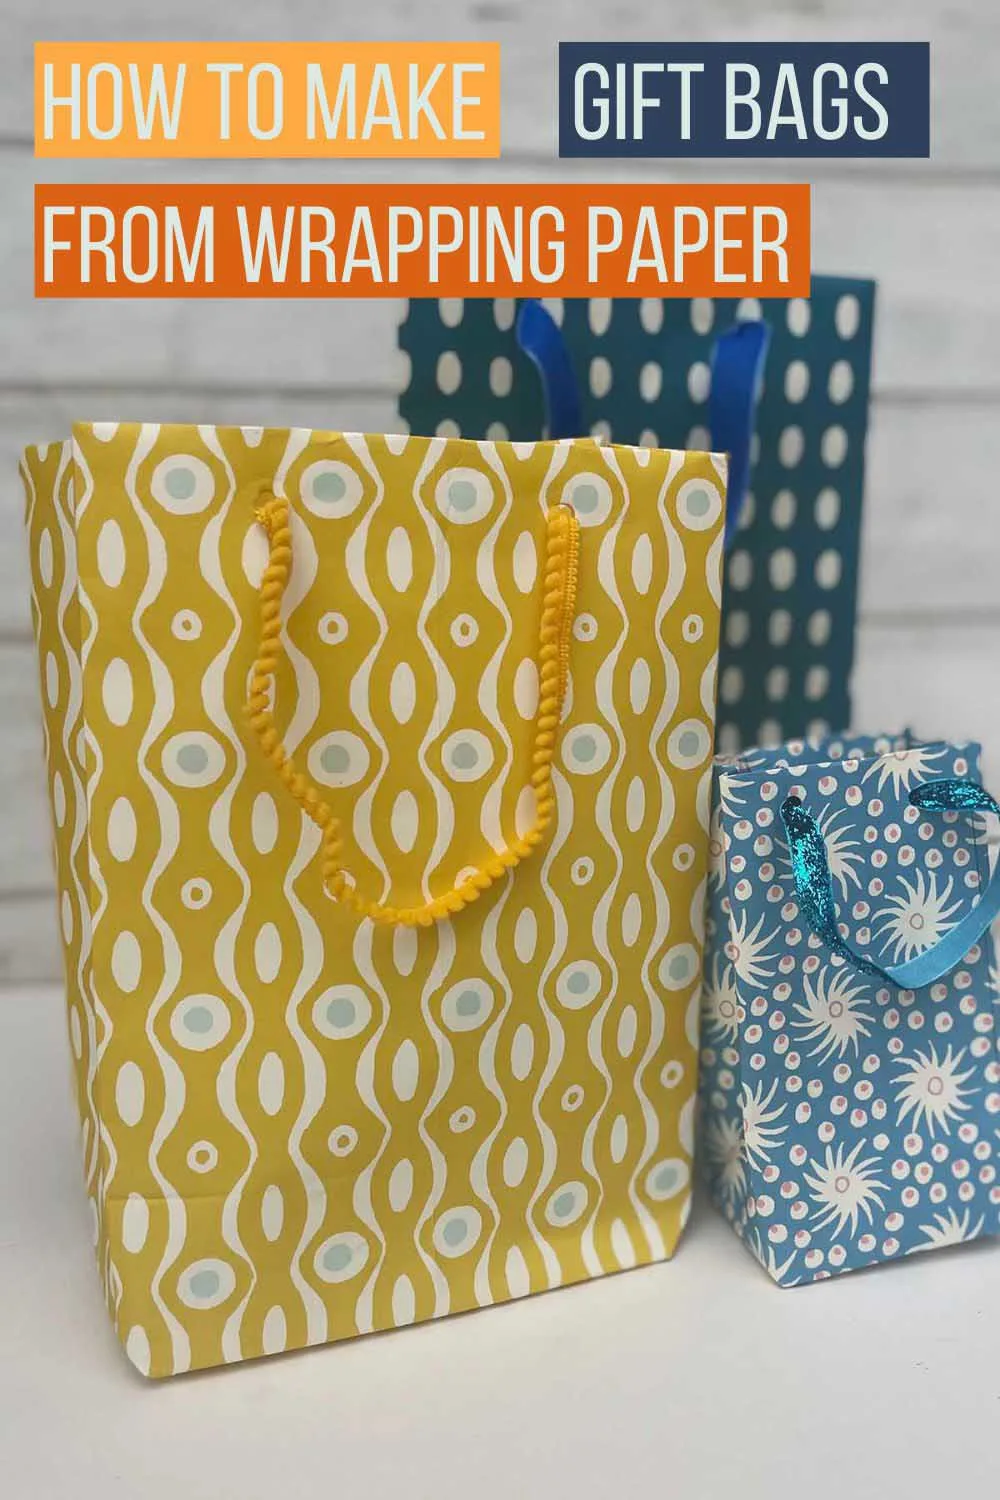 How to Make a Bag Out of Wrapping Paper The Easy Way - Pillar Box Blue